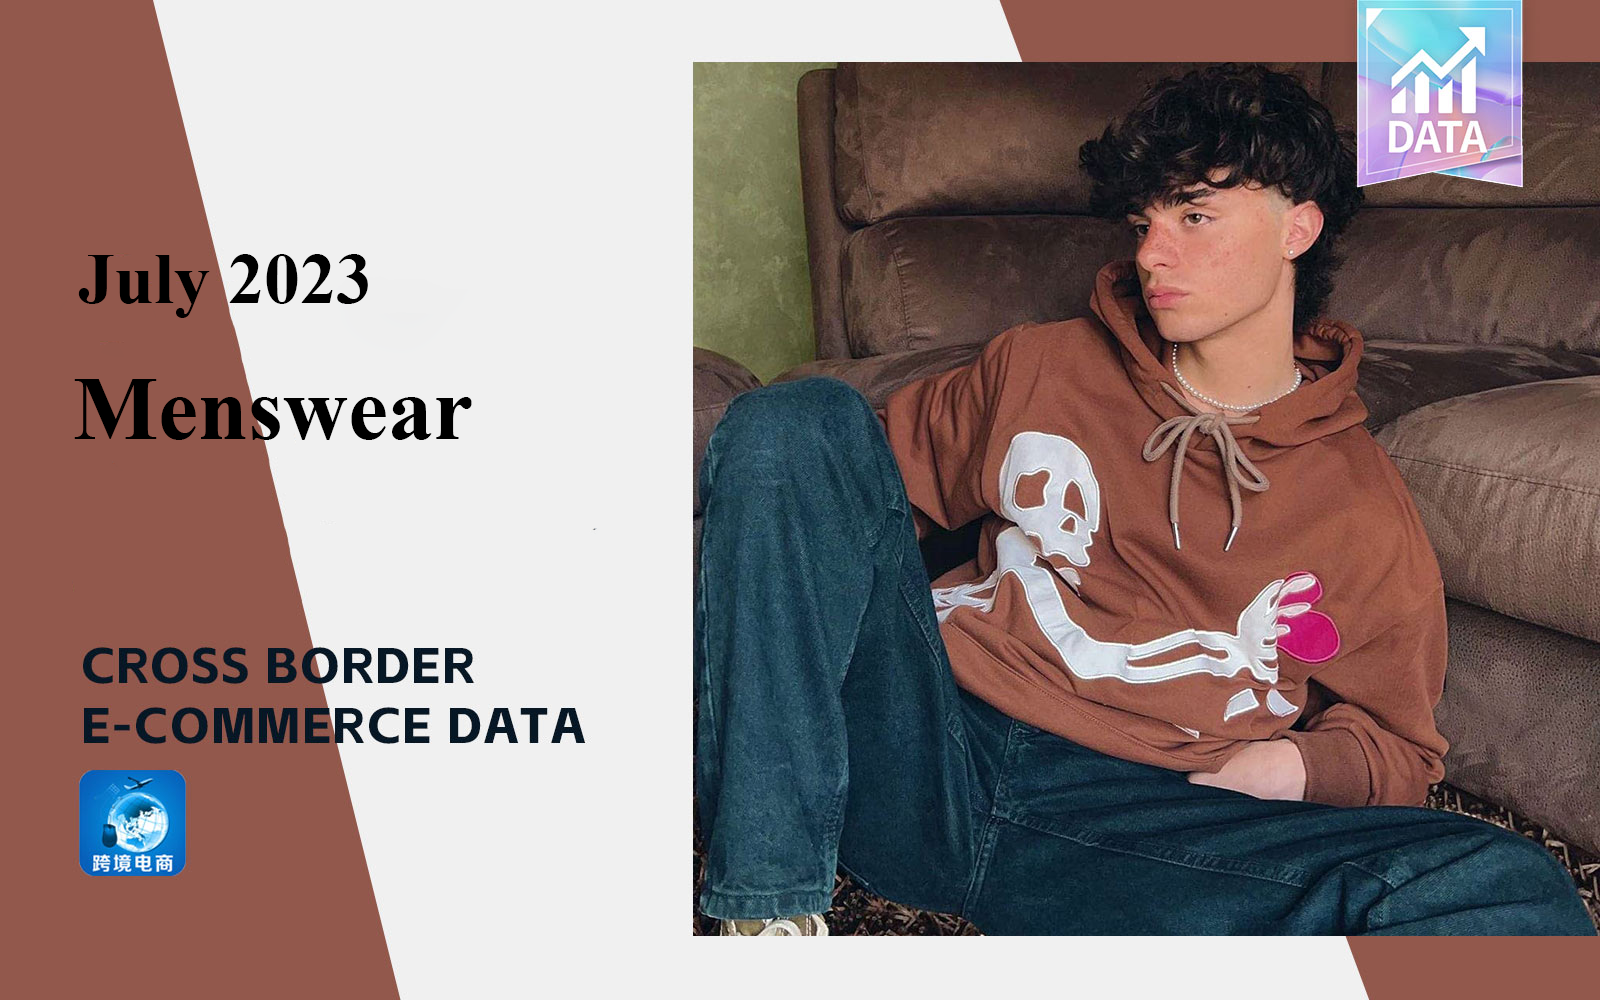 The Data Analysis of Cross Border Menswear E-commerce in July